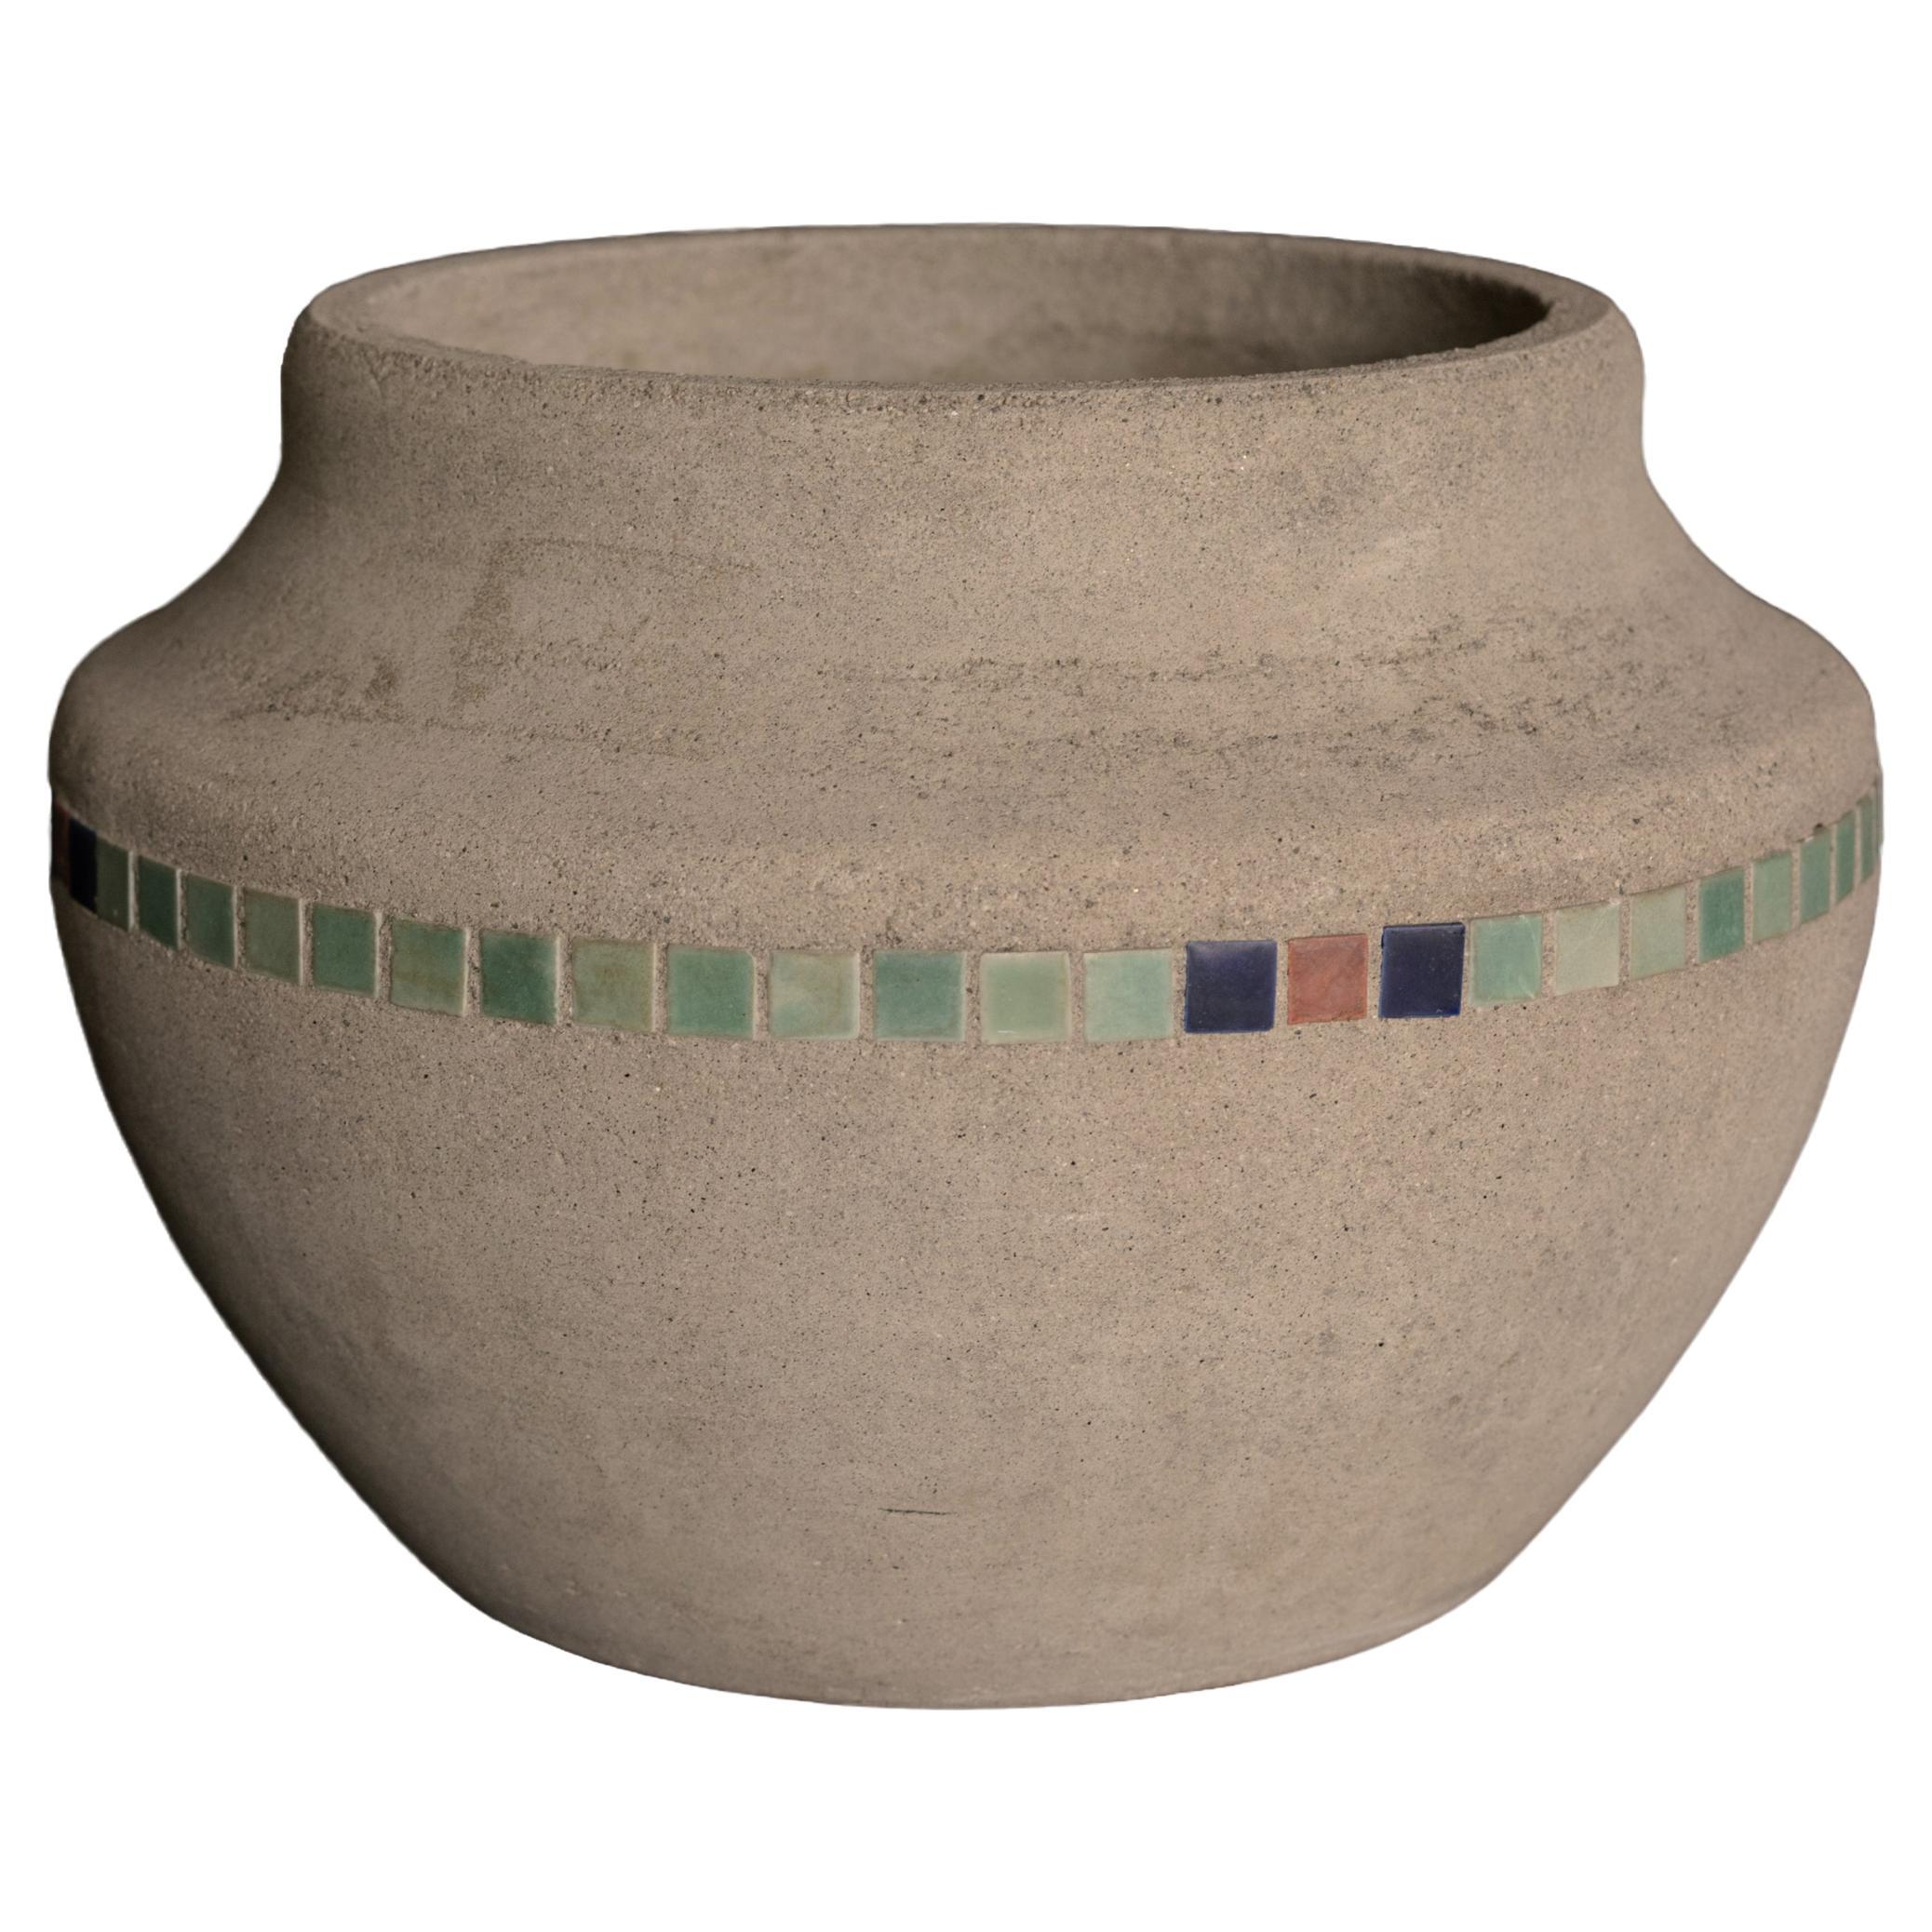 Concrete and Tiled Mosaic Planter by Hillside Pottery Company